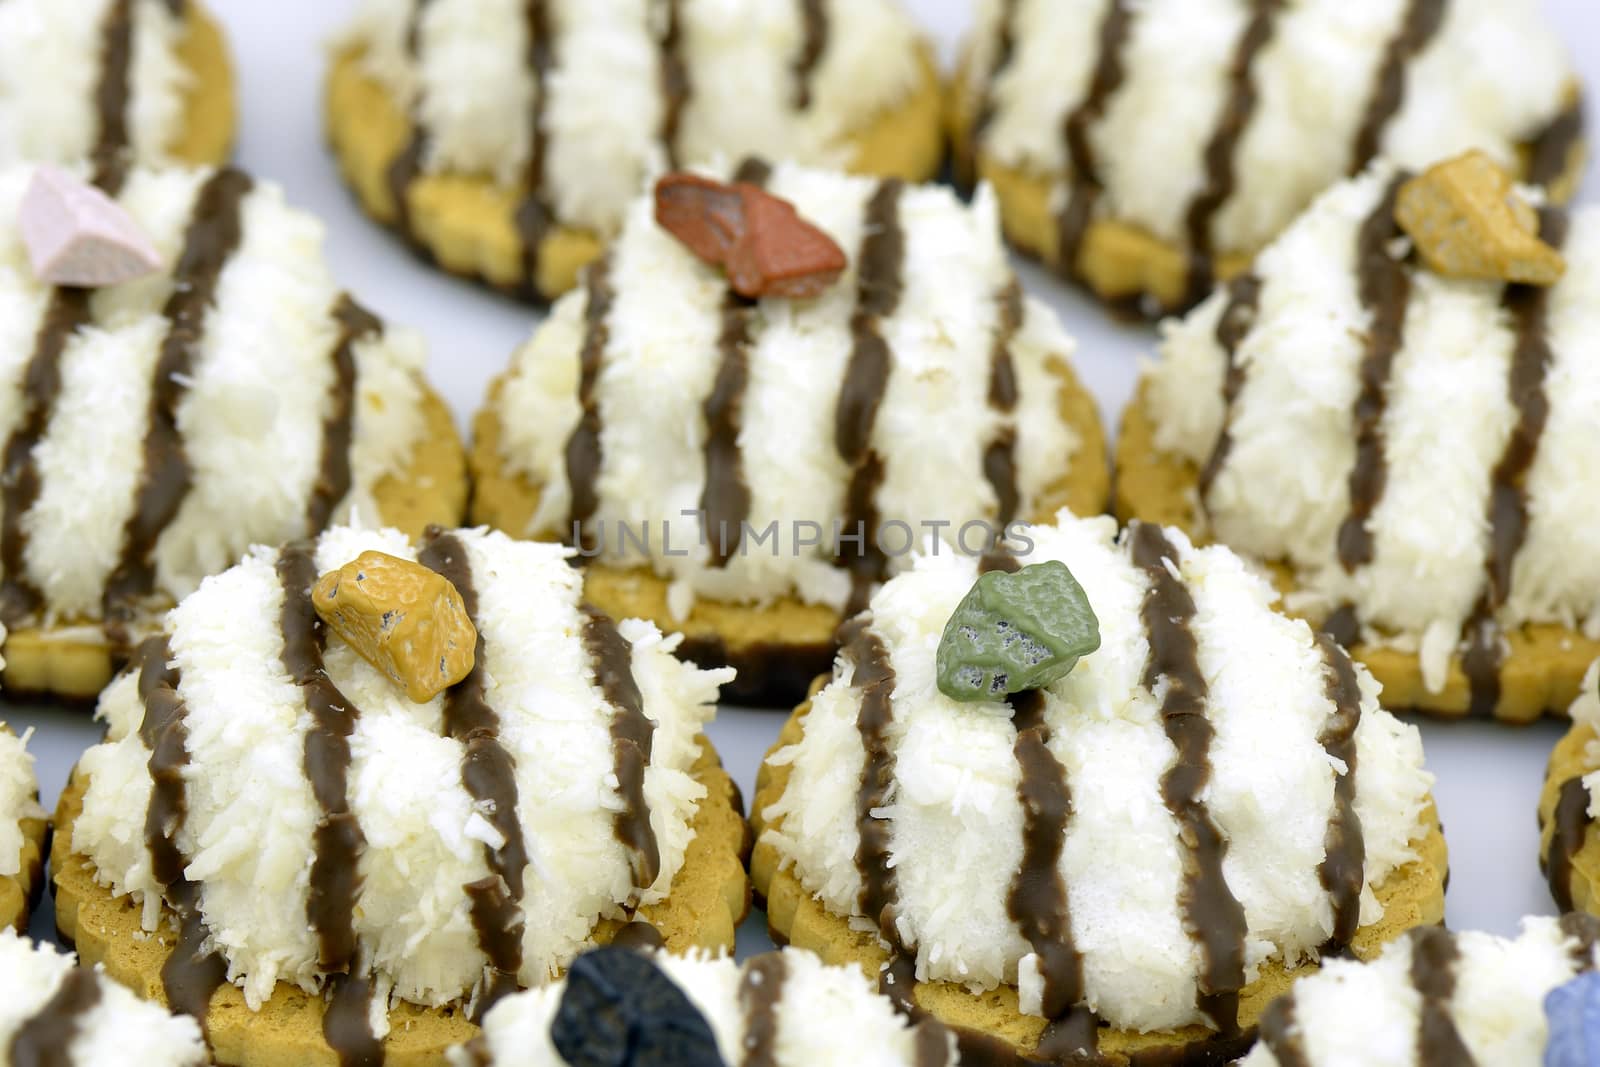 Several coconut cookies with chocolate stripes decorated with chocolate pebble